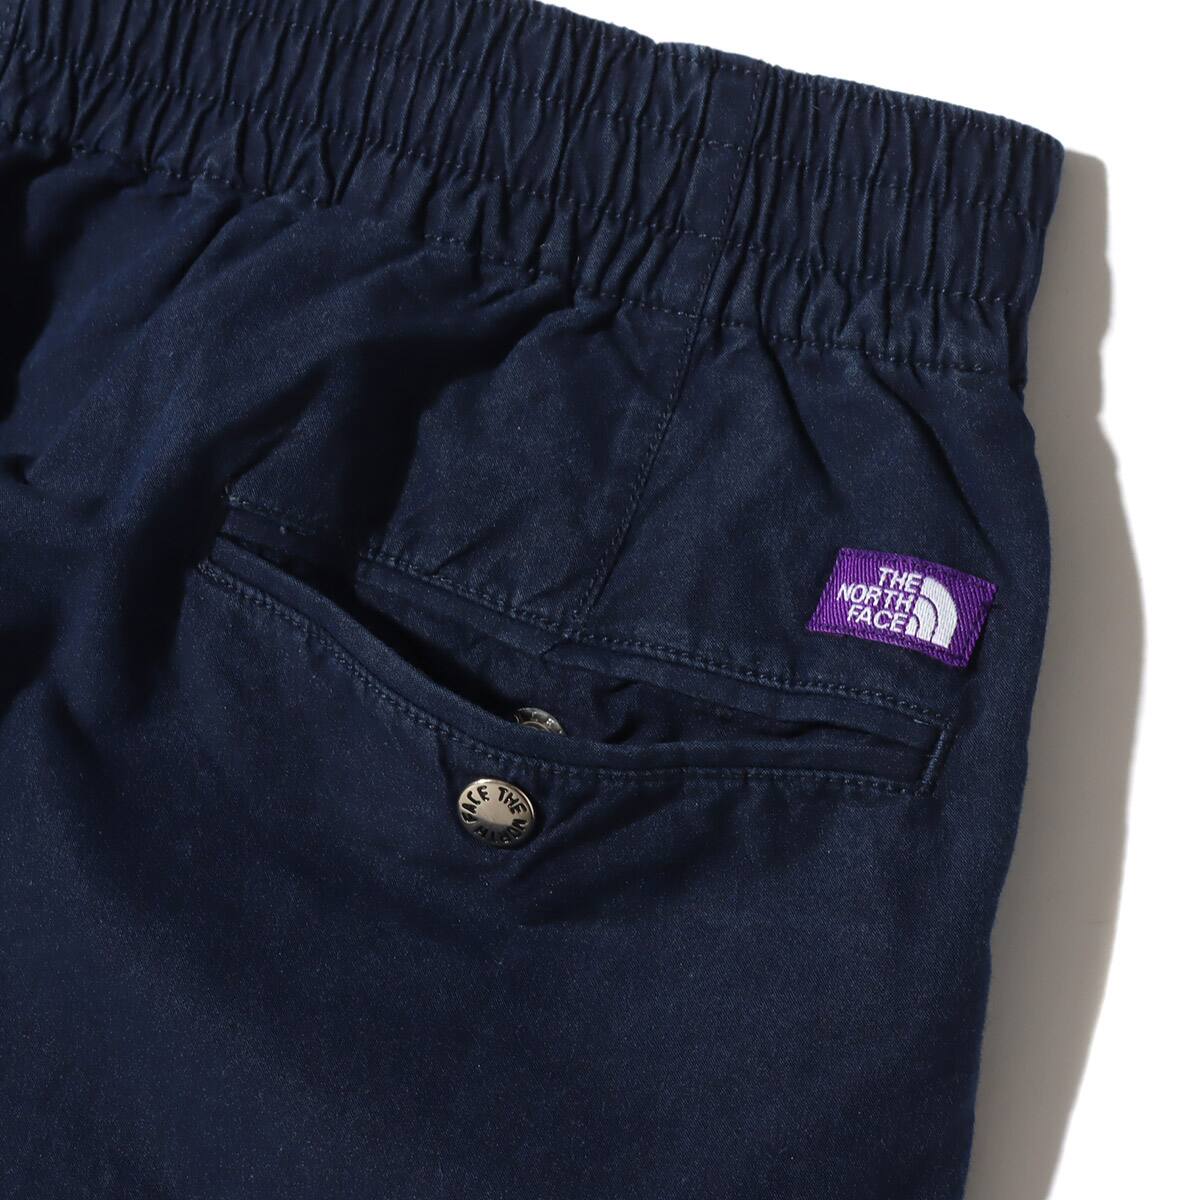 PALACE THE NORTH FACE PURPLE LABEL Indigo Ripstop Mountain Wind